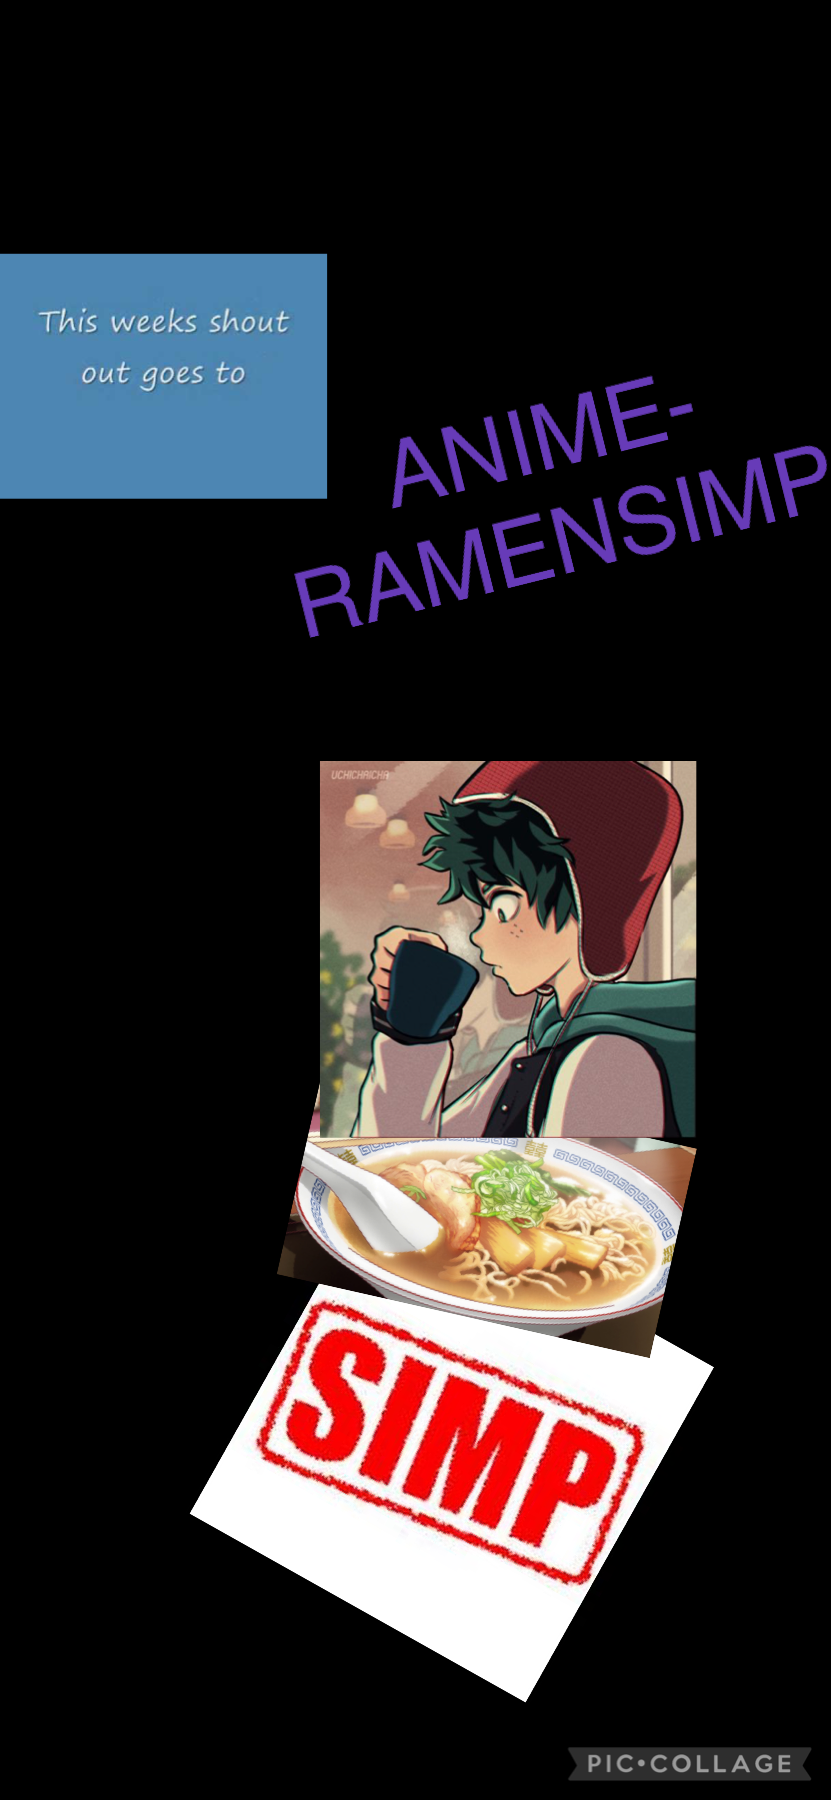 😜TAP😜
I’m doing a weekly shoutout to the person who likes/ comments on my collages the most during the week. THANK YOU ANIME-RAMENSIMP!